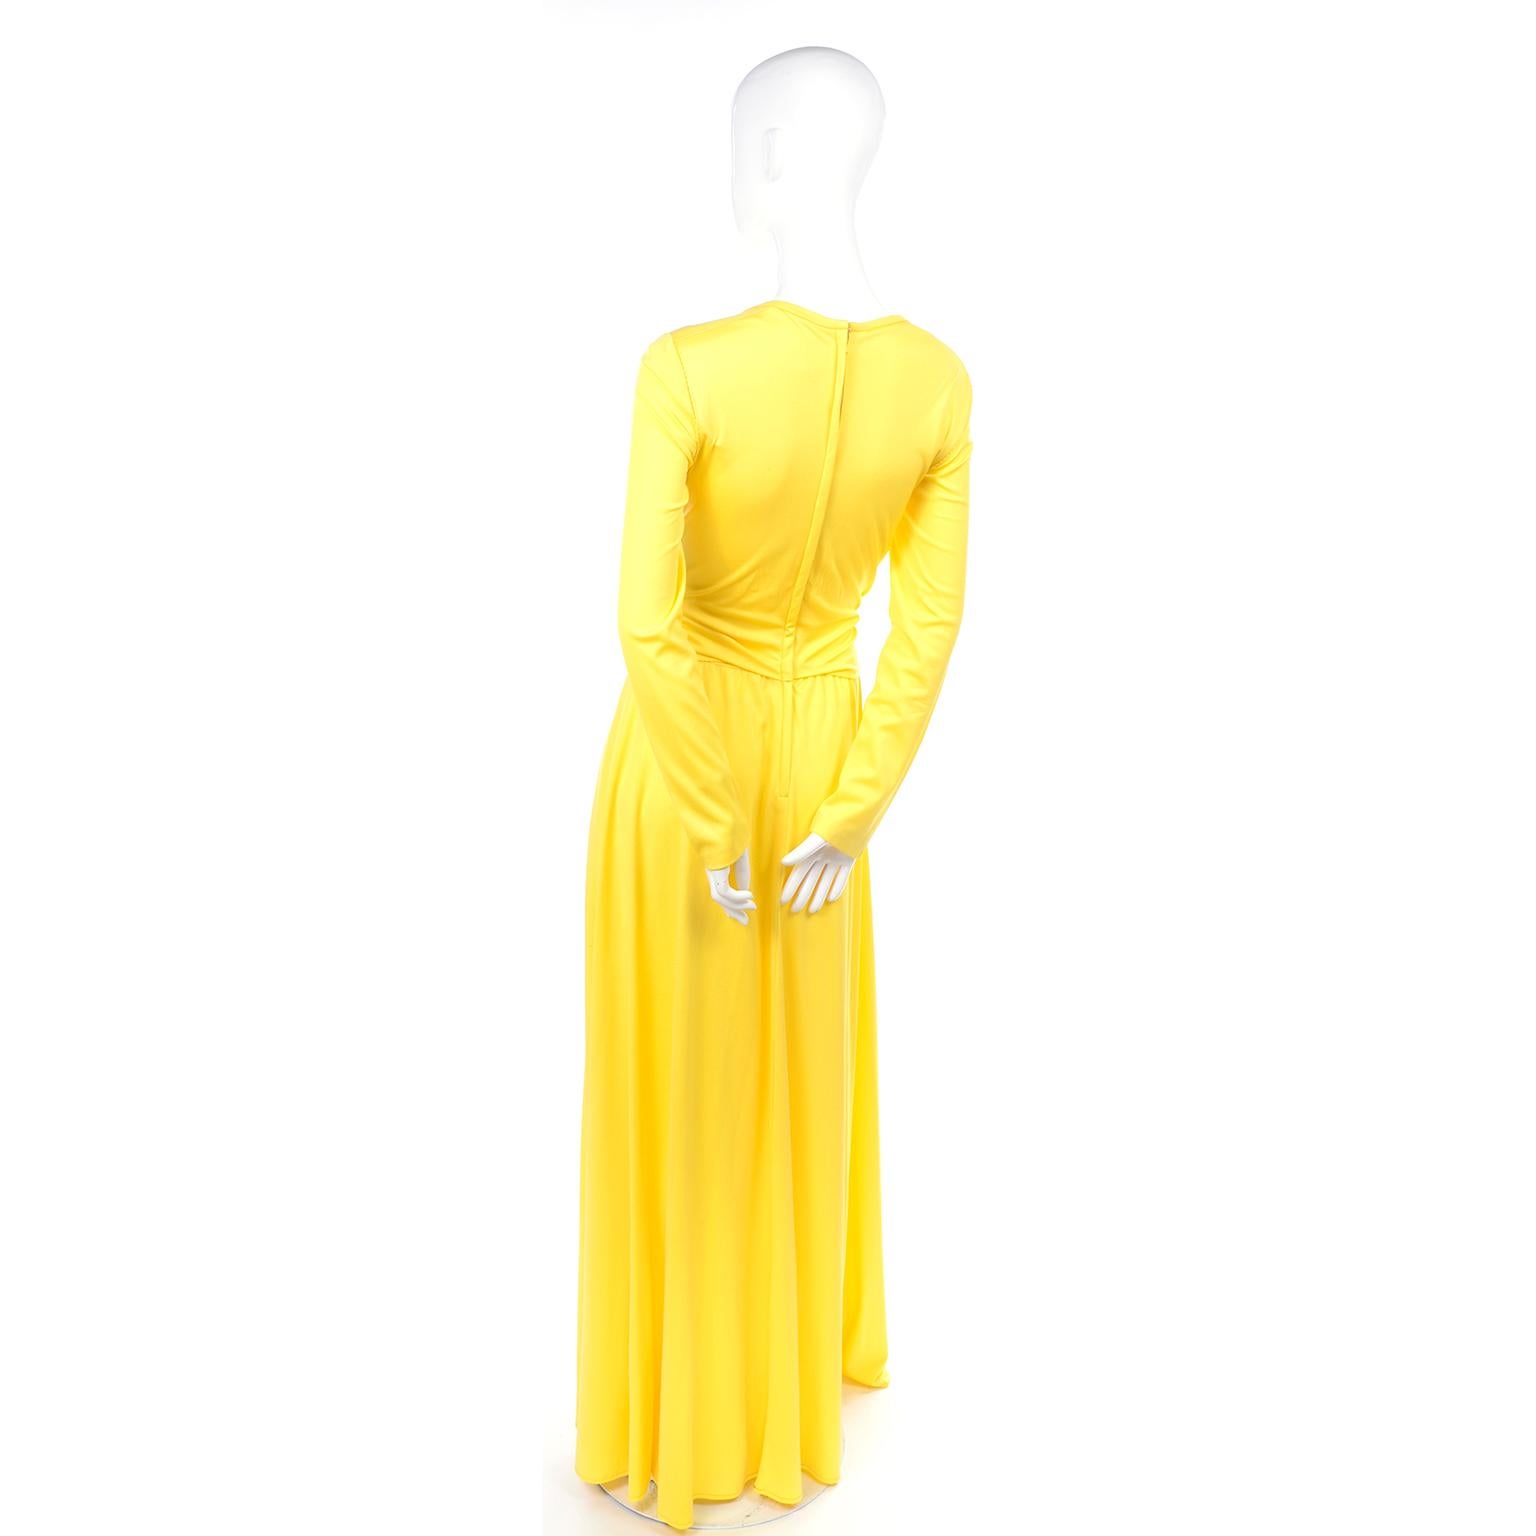 Lillie Rubin Collection 700 Vintage Dress in Yellow Jersey With Sash In Excellent Condition For Sale In Portland, OR